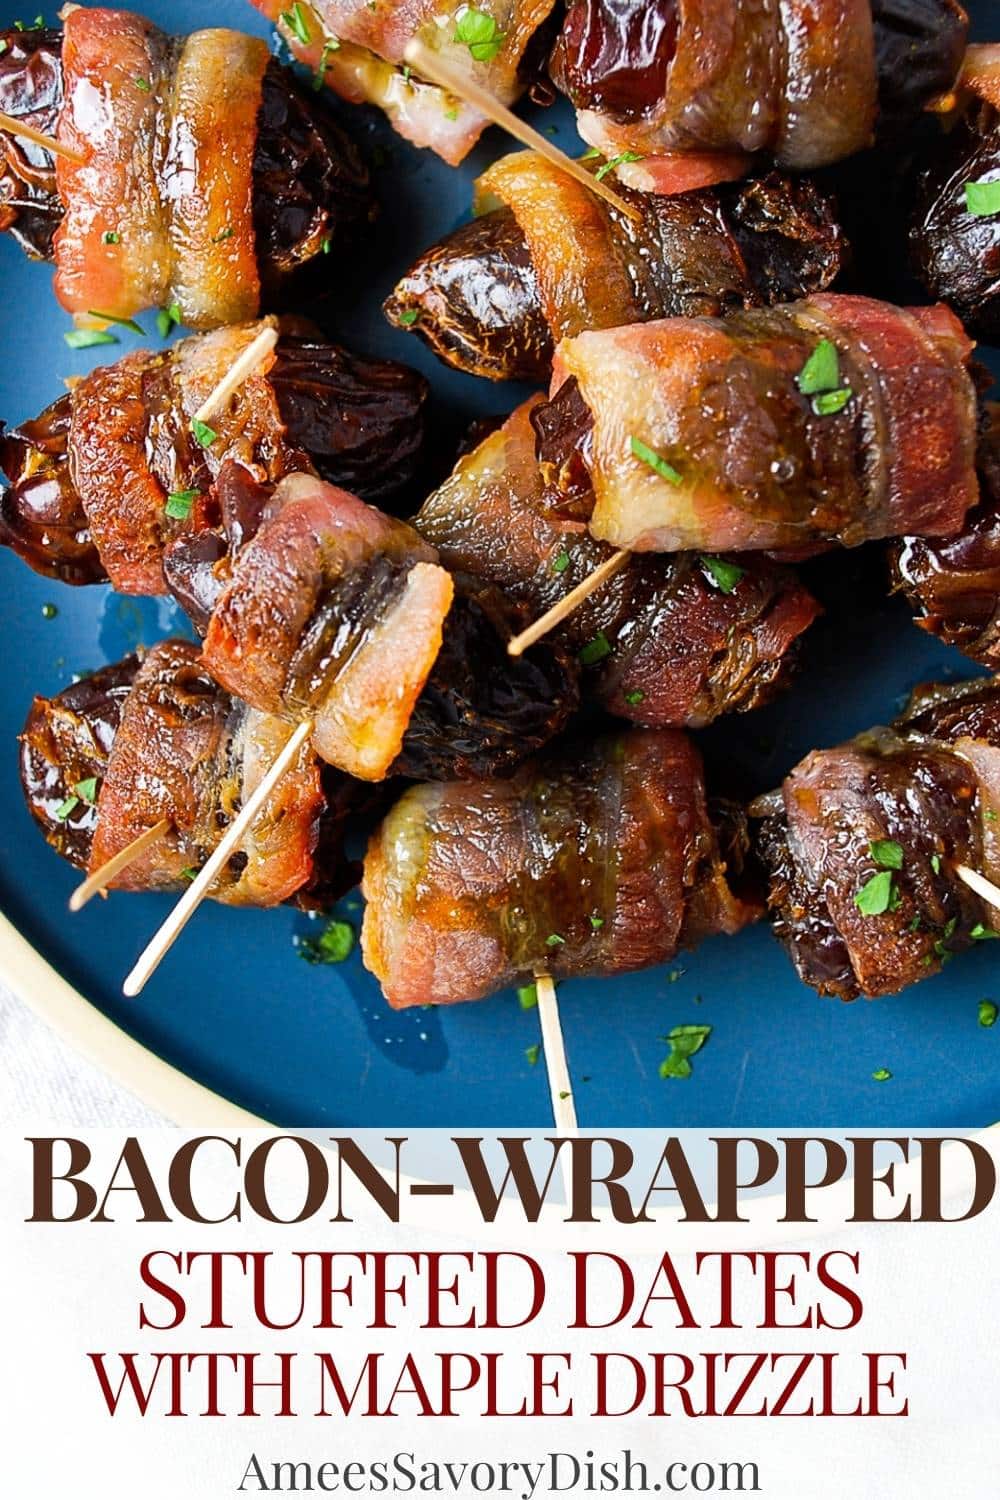 Bacon-wrapped stuffed dates are a quick and easy, gluten-free, dairy-free appetizer stuffed with almonds and baked in the oven to crispy perfection with a drizzle of maple syrup.  This is the perfect sweet and savory appetizer recipe for your next cocktail party!  via @Ameessavorydish